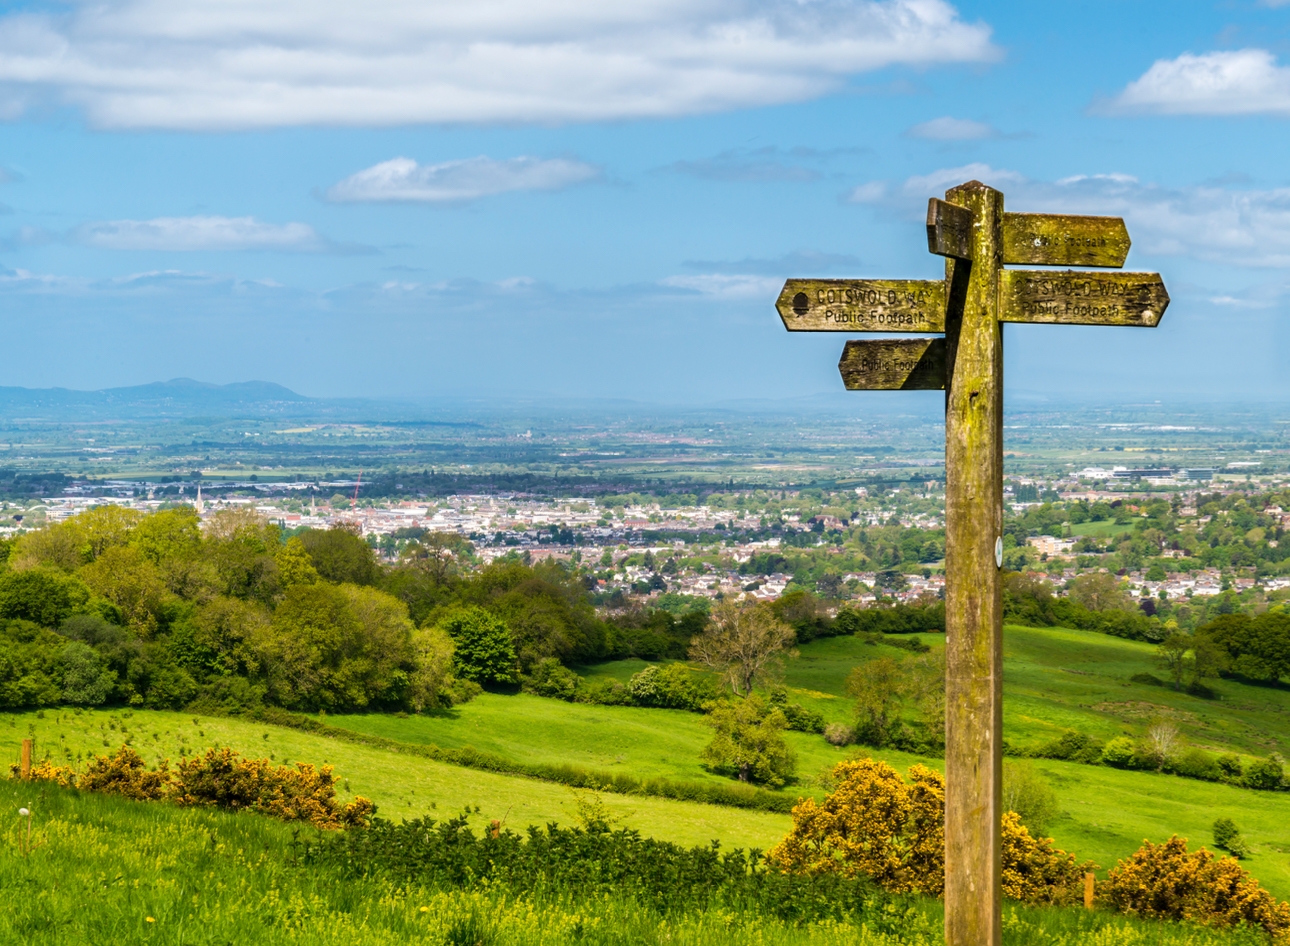 Wooden signpost stands in front of rolling green fields and a town